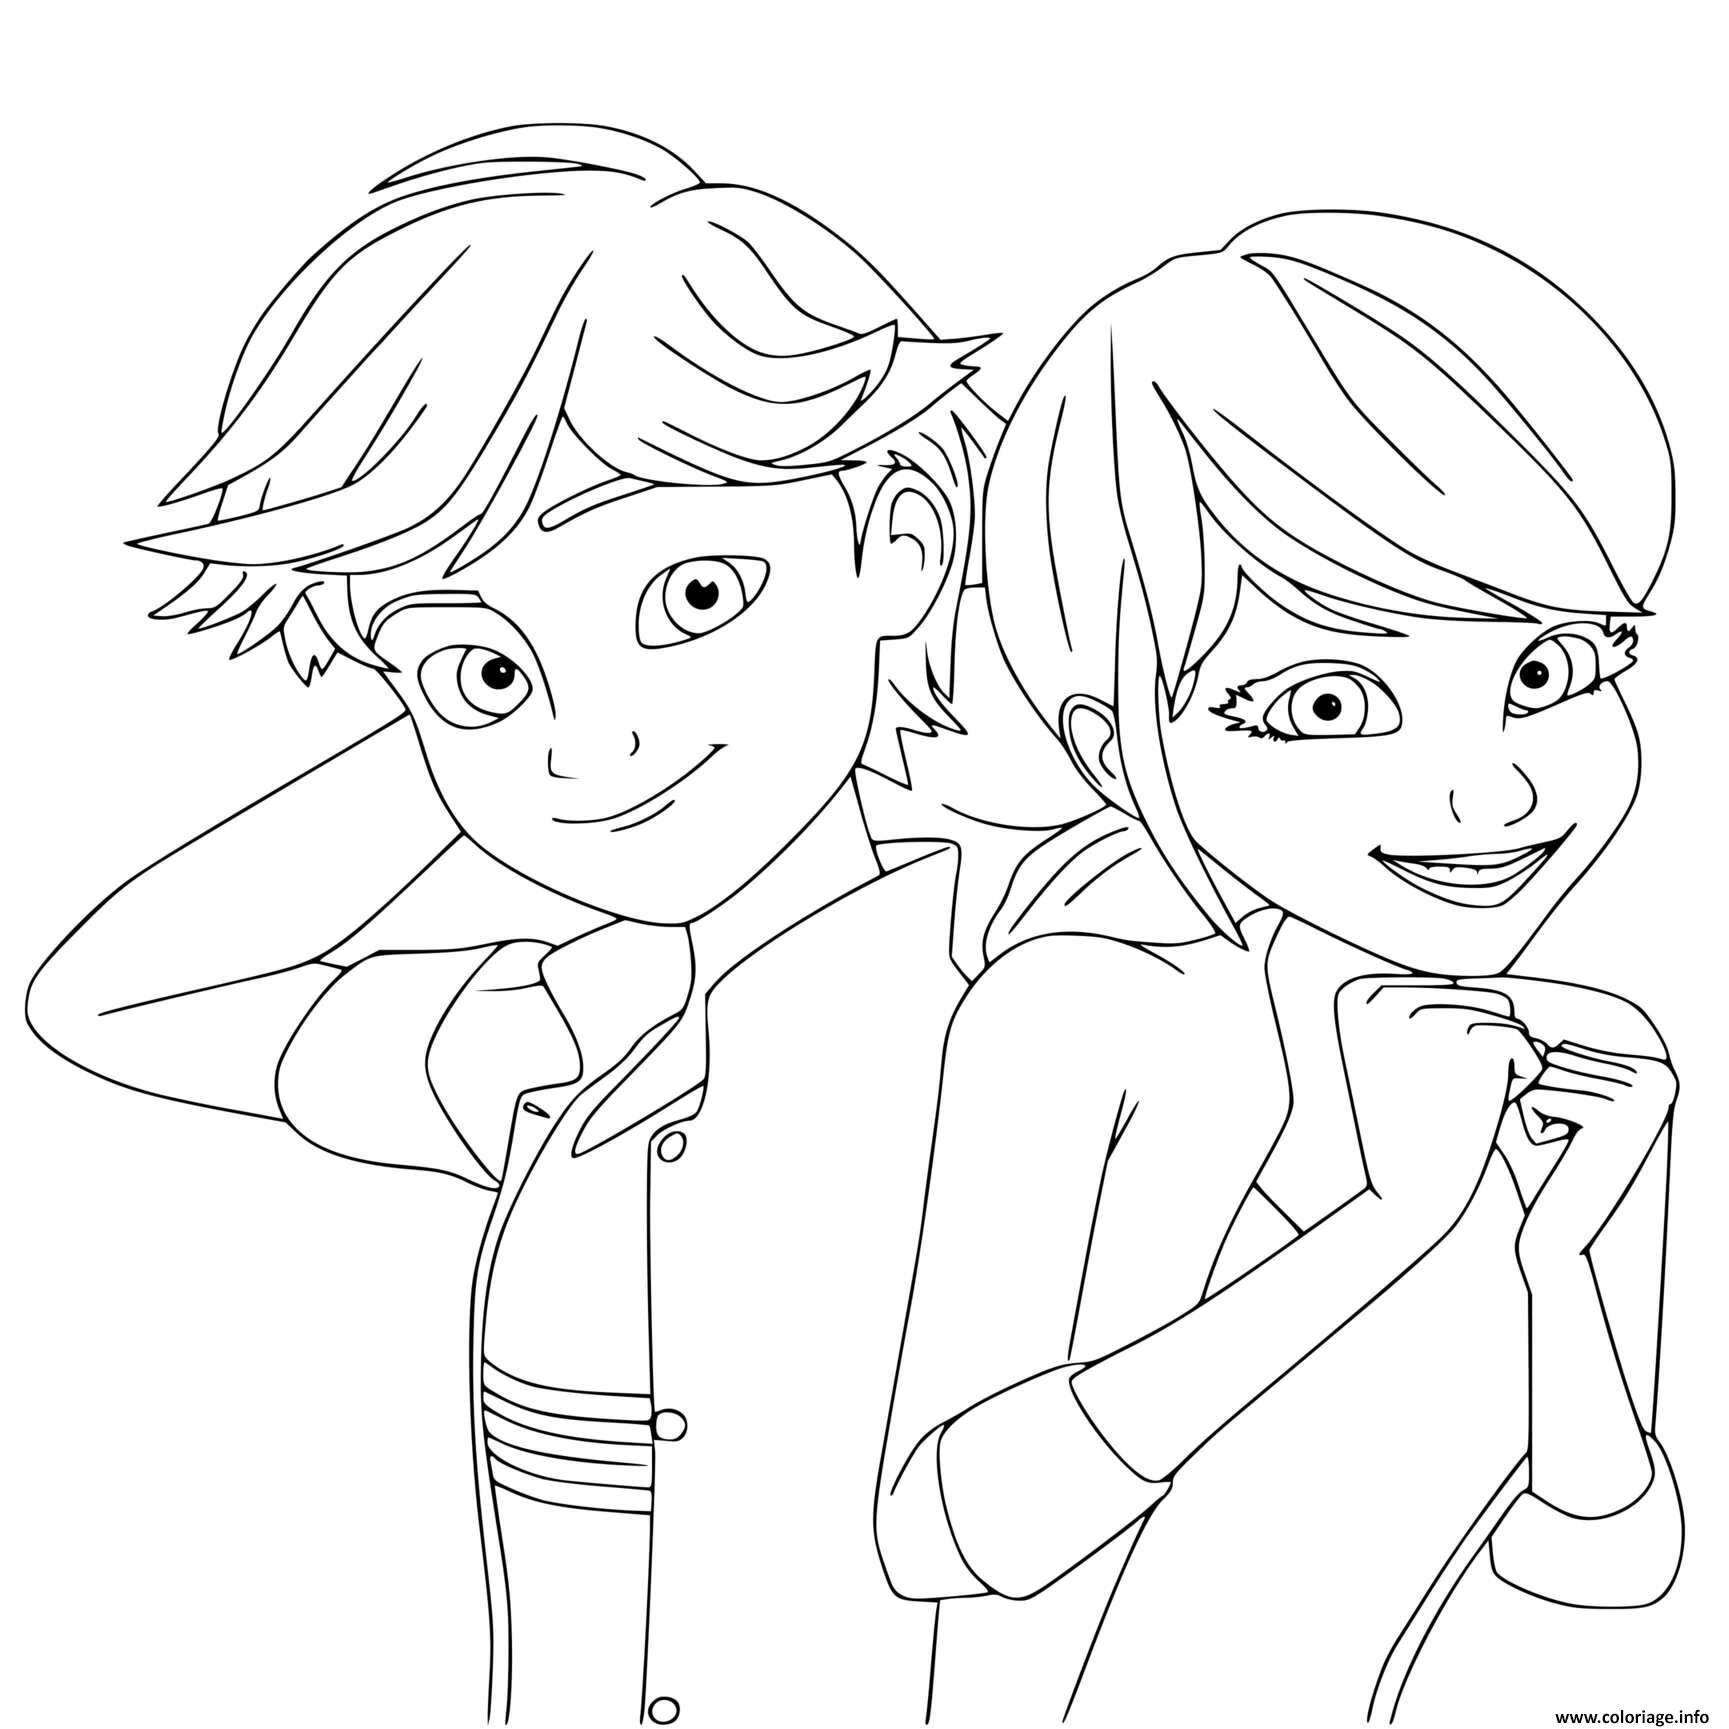 Miraculous Adrien Marinette Coloring Coloring Pages